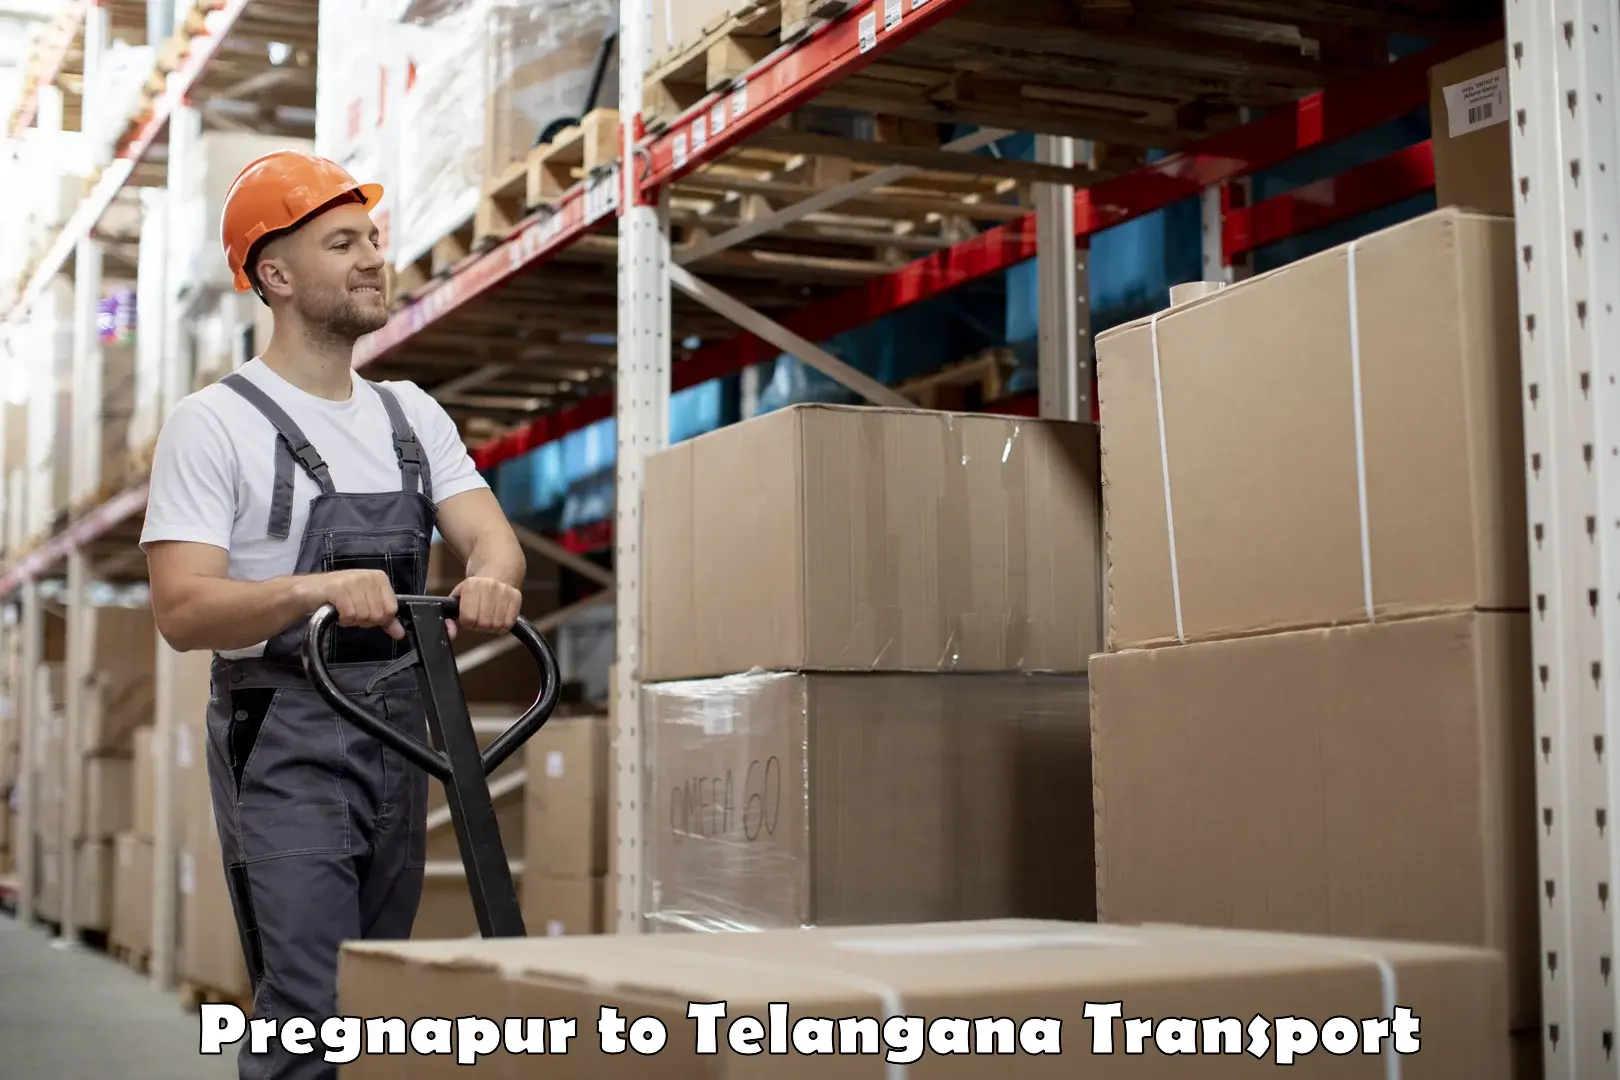 Truck transport companies in India in Pregnapur to Raikal